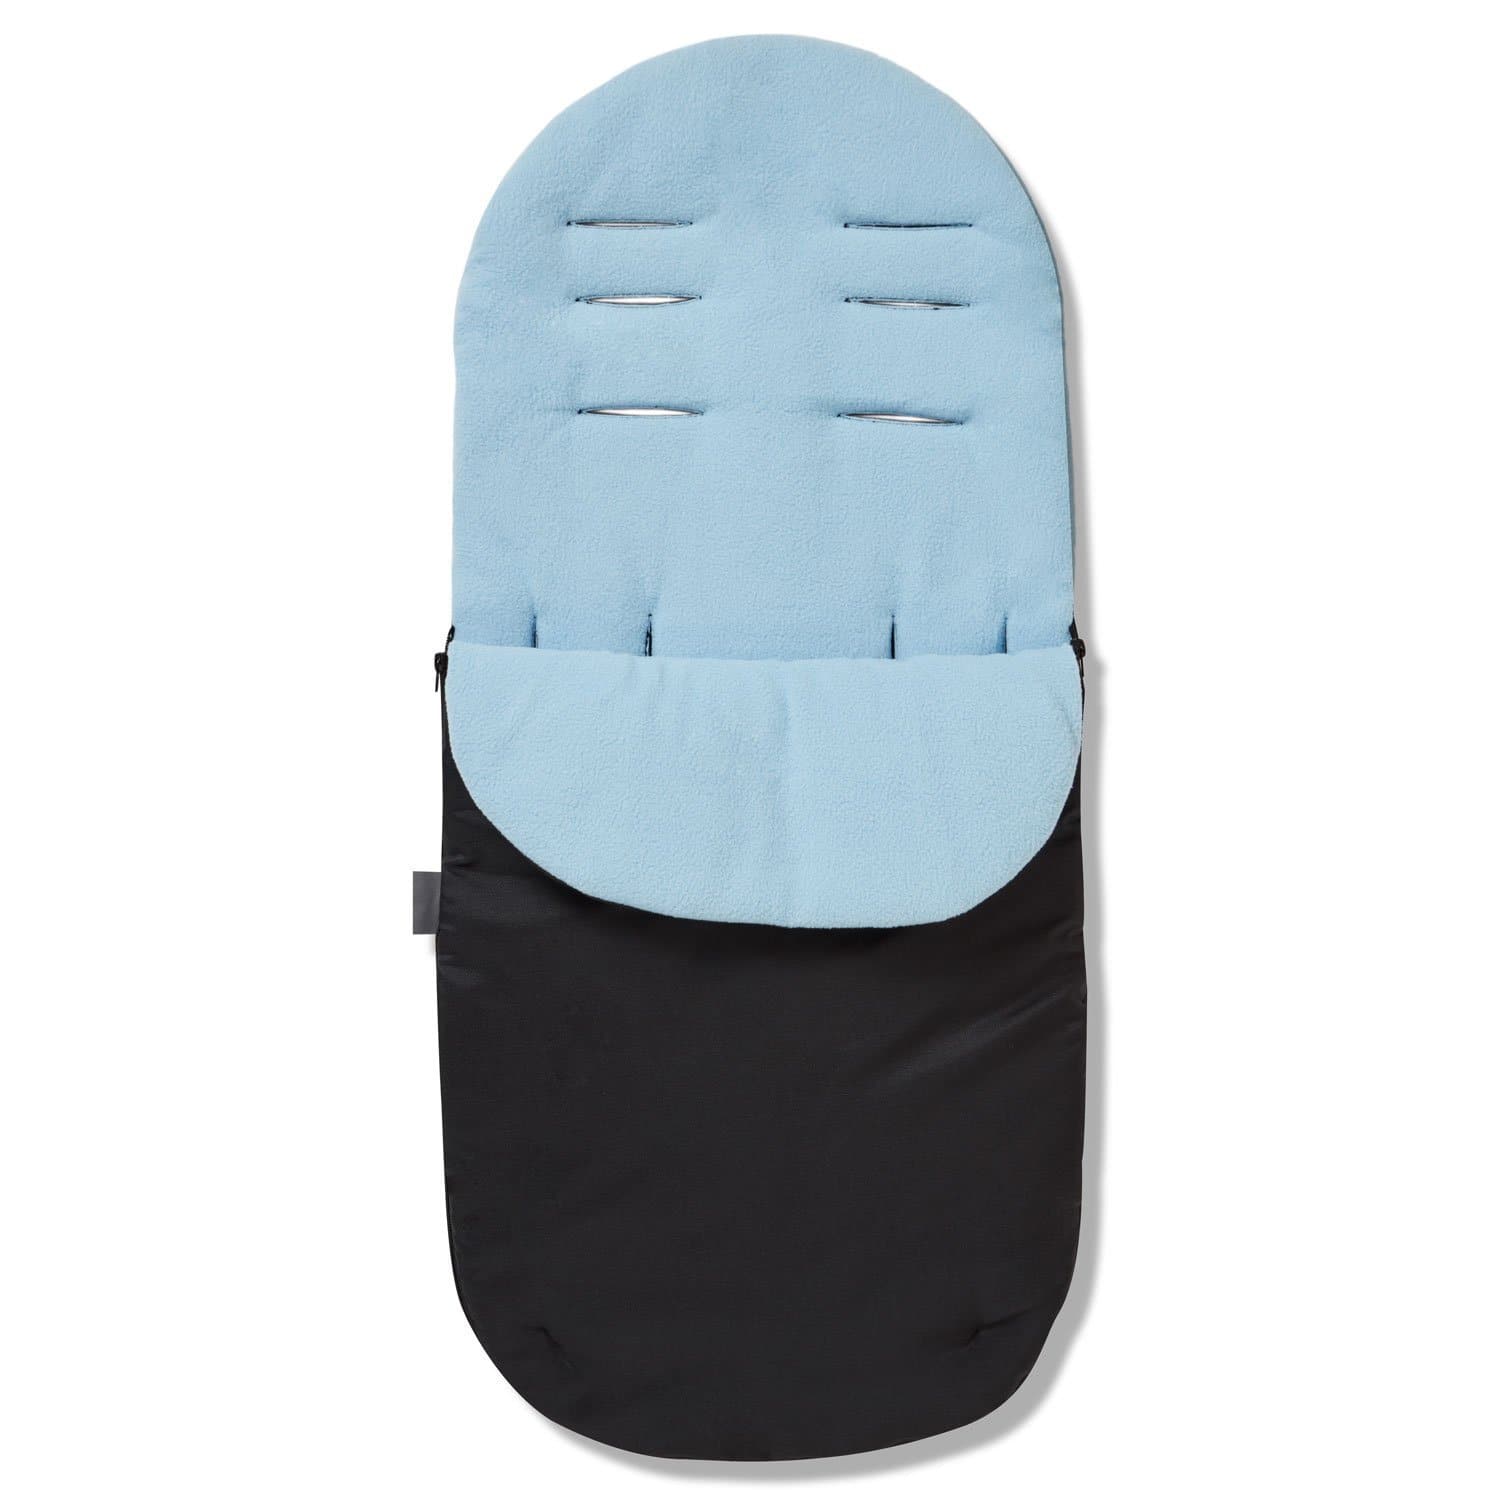 Footmuff / Cosy Toes Compatible with Uppababy - Light Blue / Fits All Models | For Your Little One